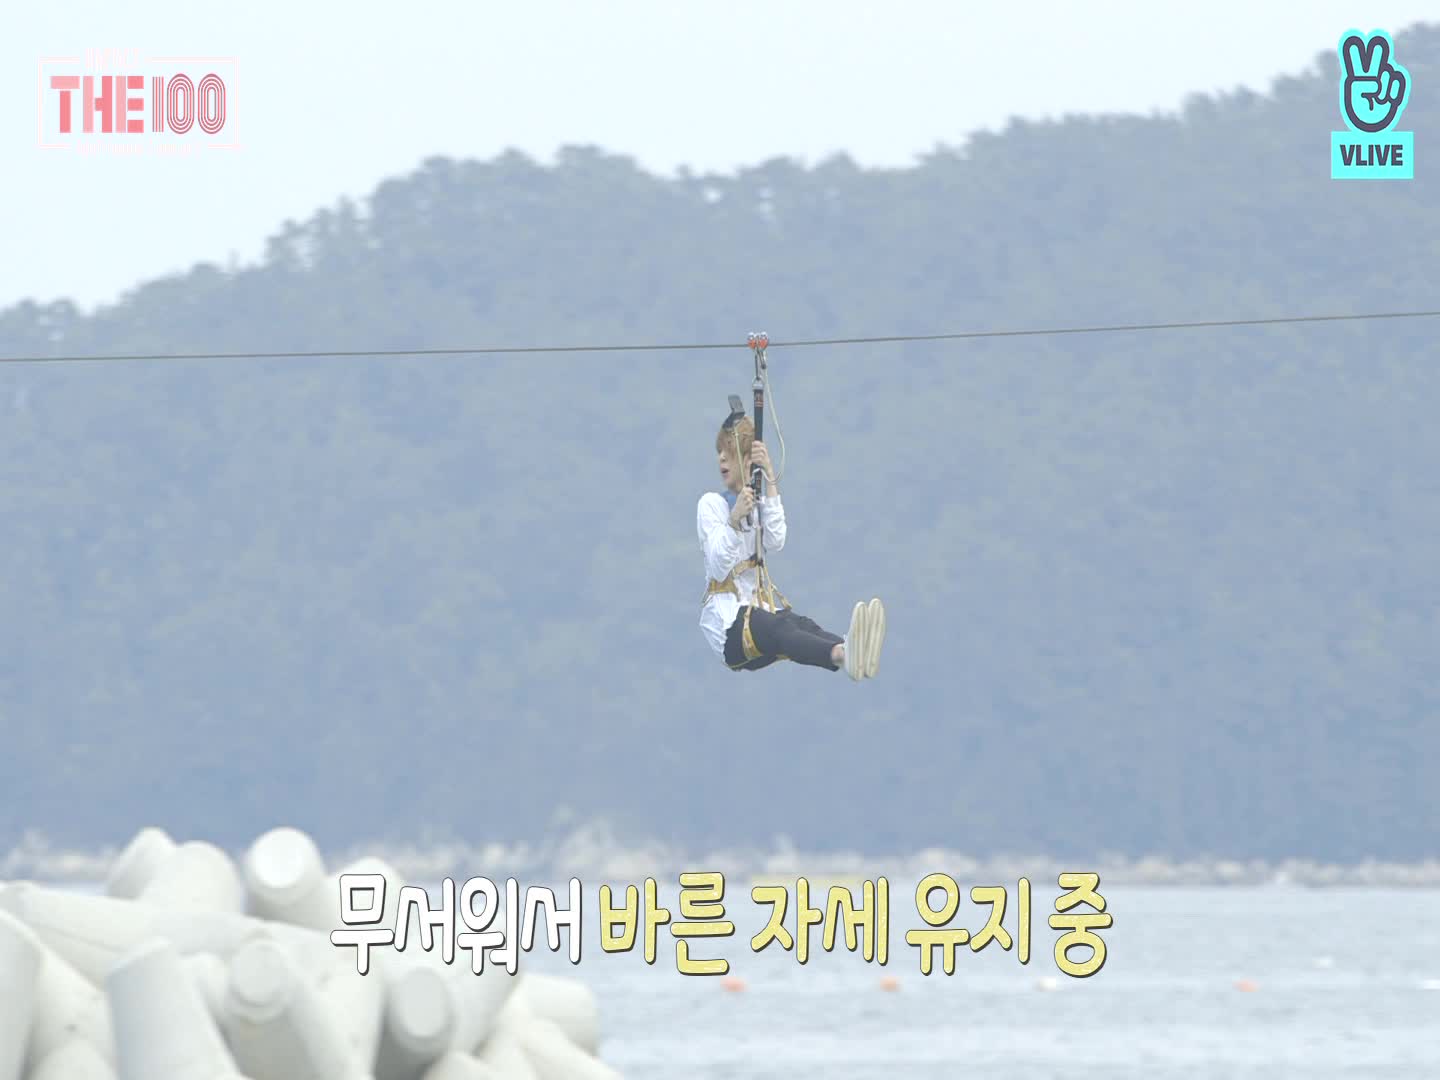 [THE100_IMFACT] Ung Jae's pick, free time in the water - 웅재 PICK, 즐거운 물놀이 자유시가아안!! Ep 12.